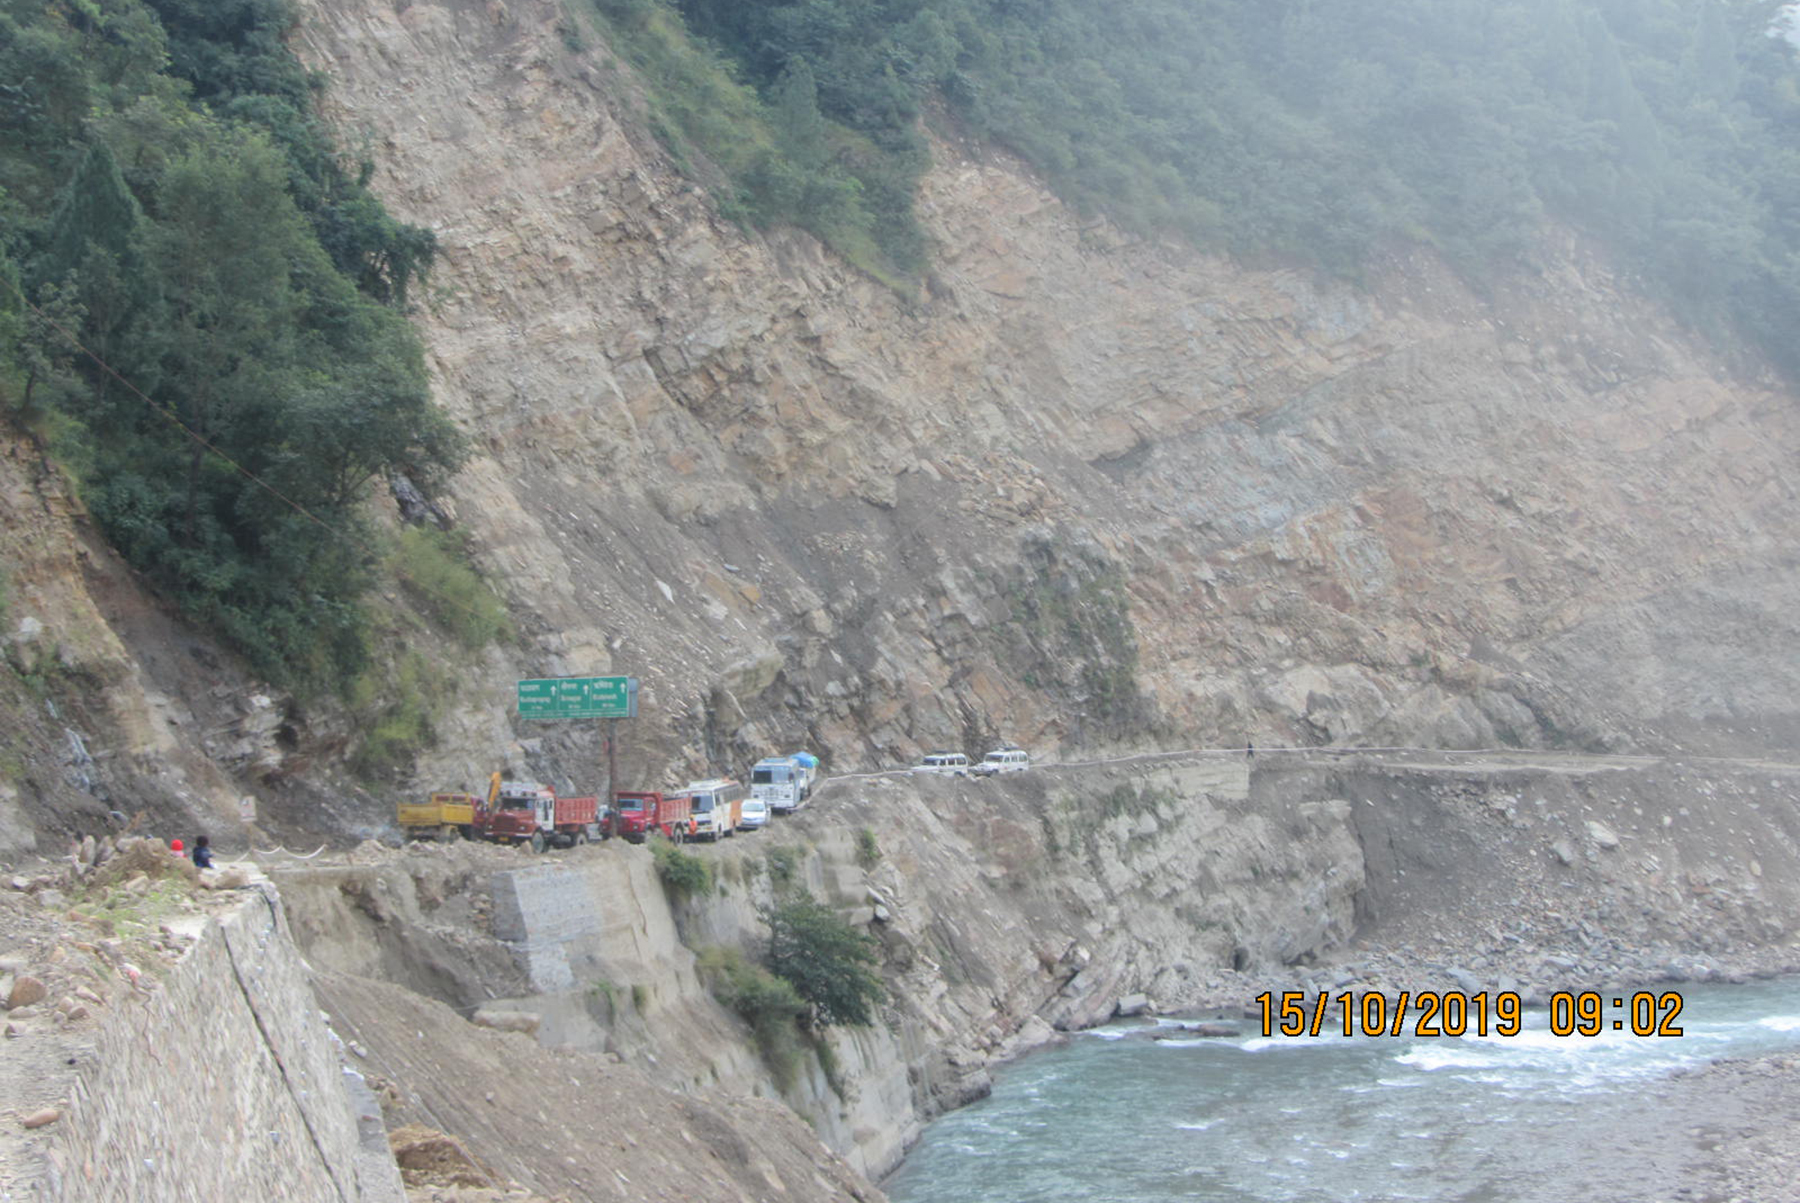 <p>Vehicles stranded due to a landslide atop a road being widened under the Char Dham Project [Image by Hemant Dhyani]</p>